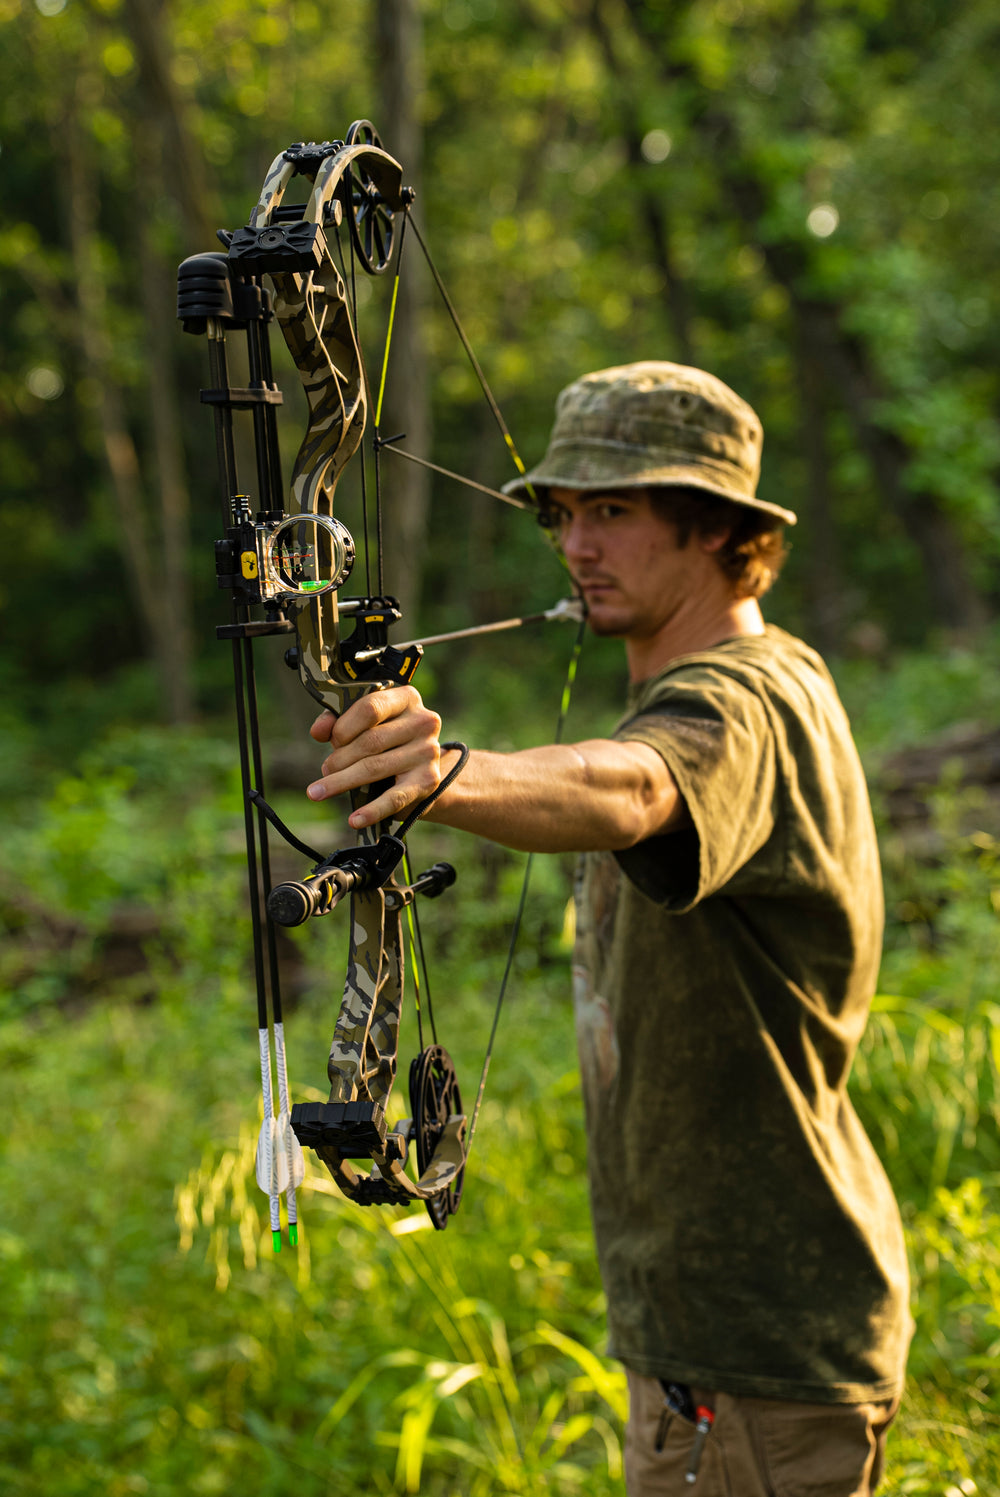 bear archery adapt+ compound bow for hunting - the hunting public bow